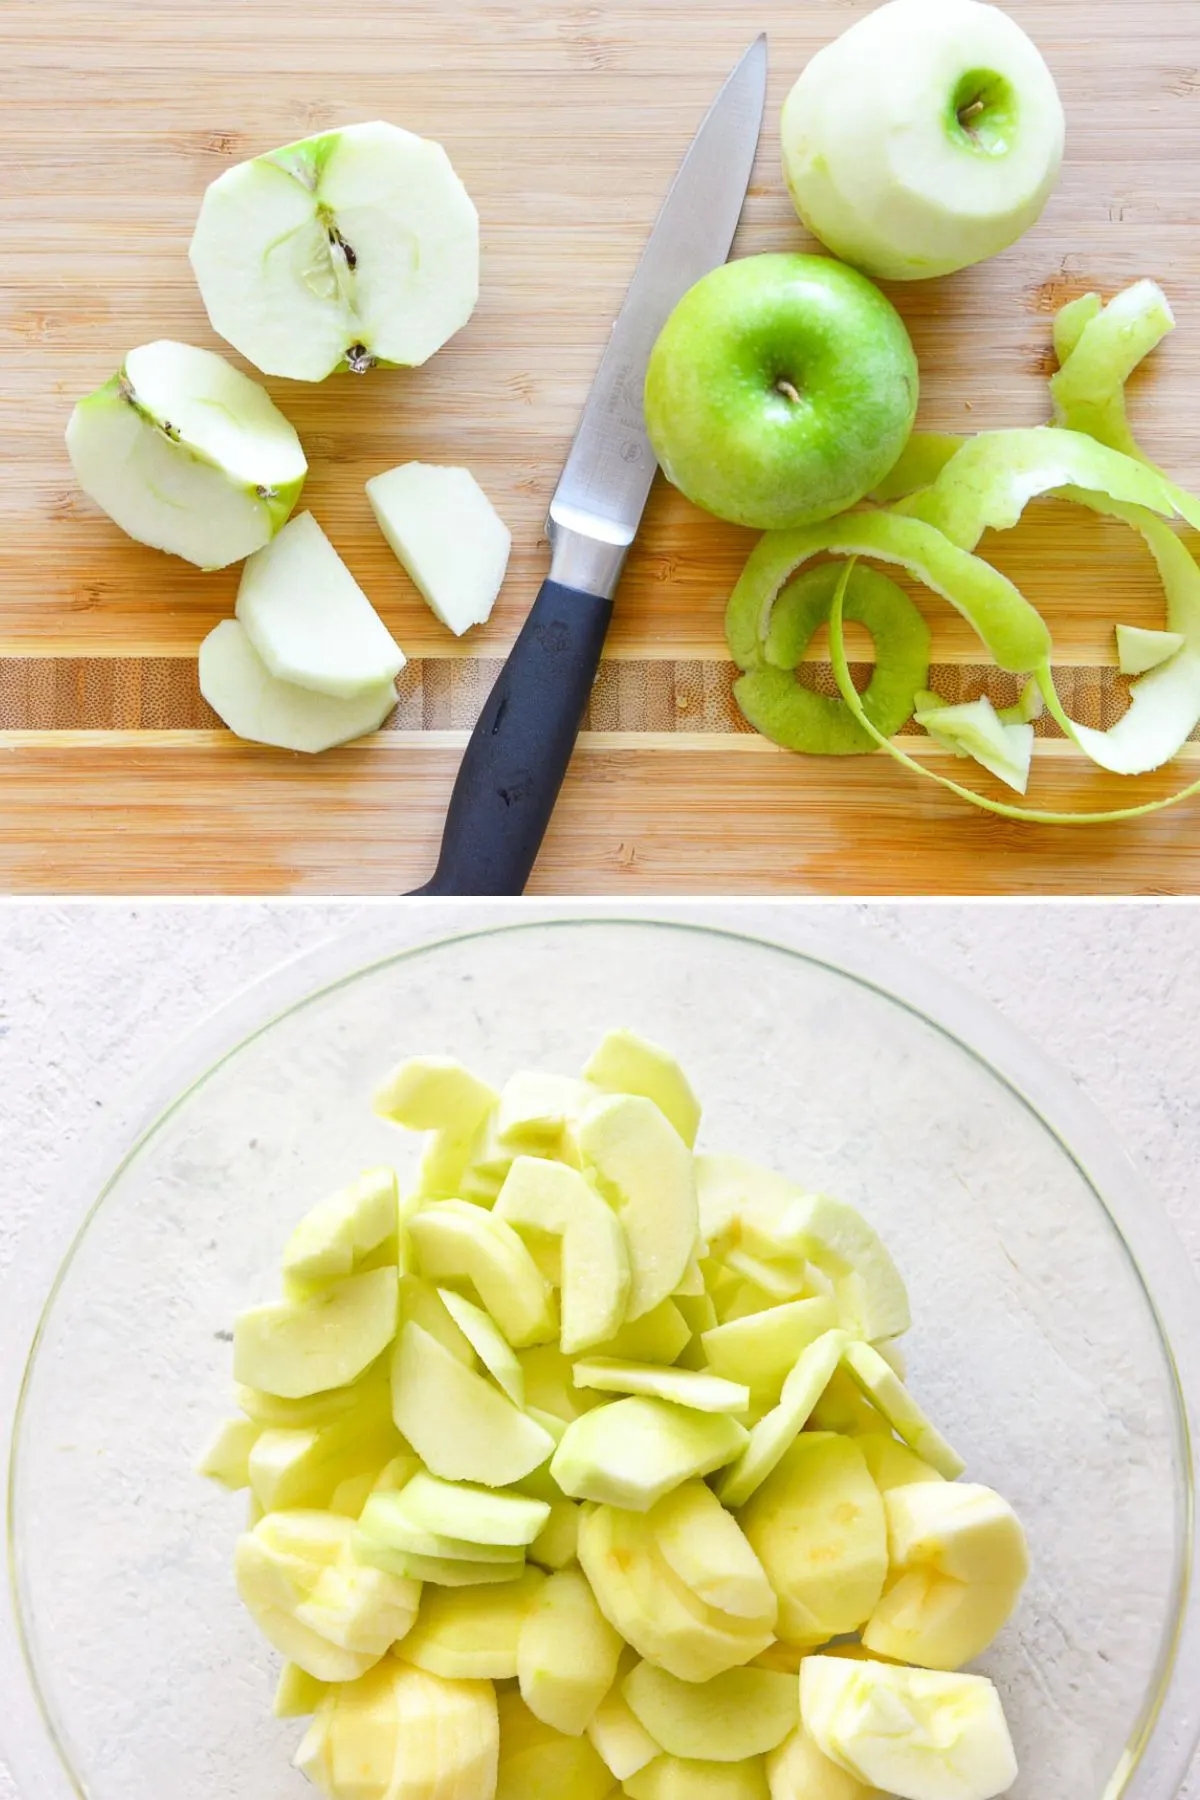 How to peel and slice apples for apple crisp